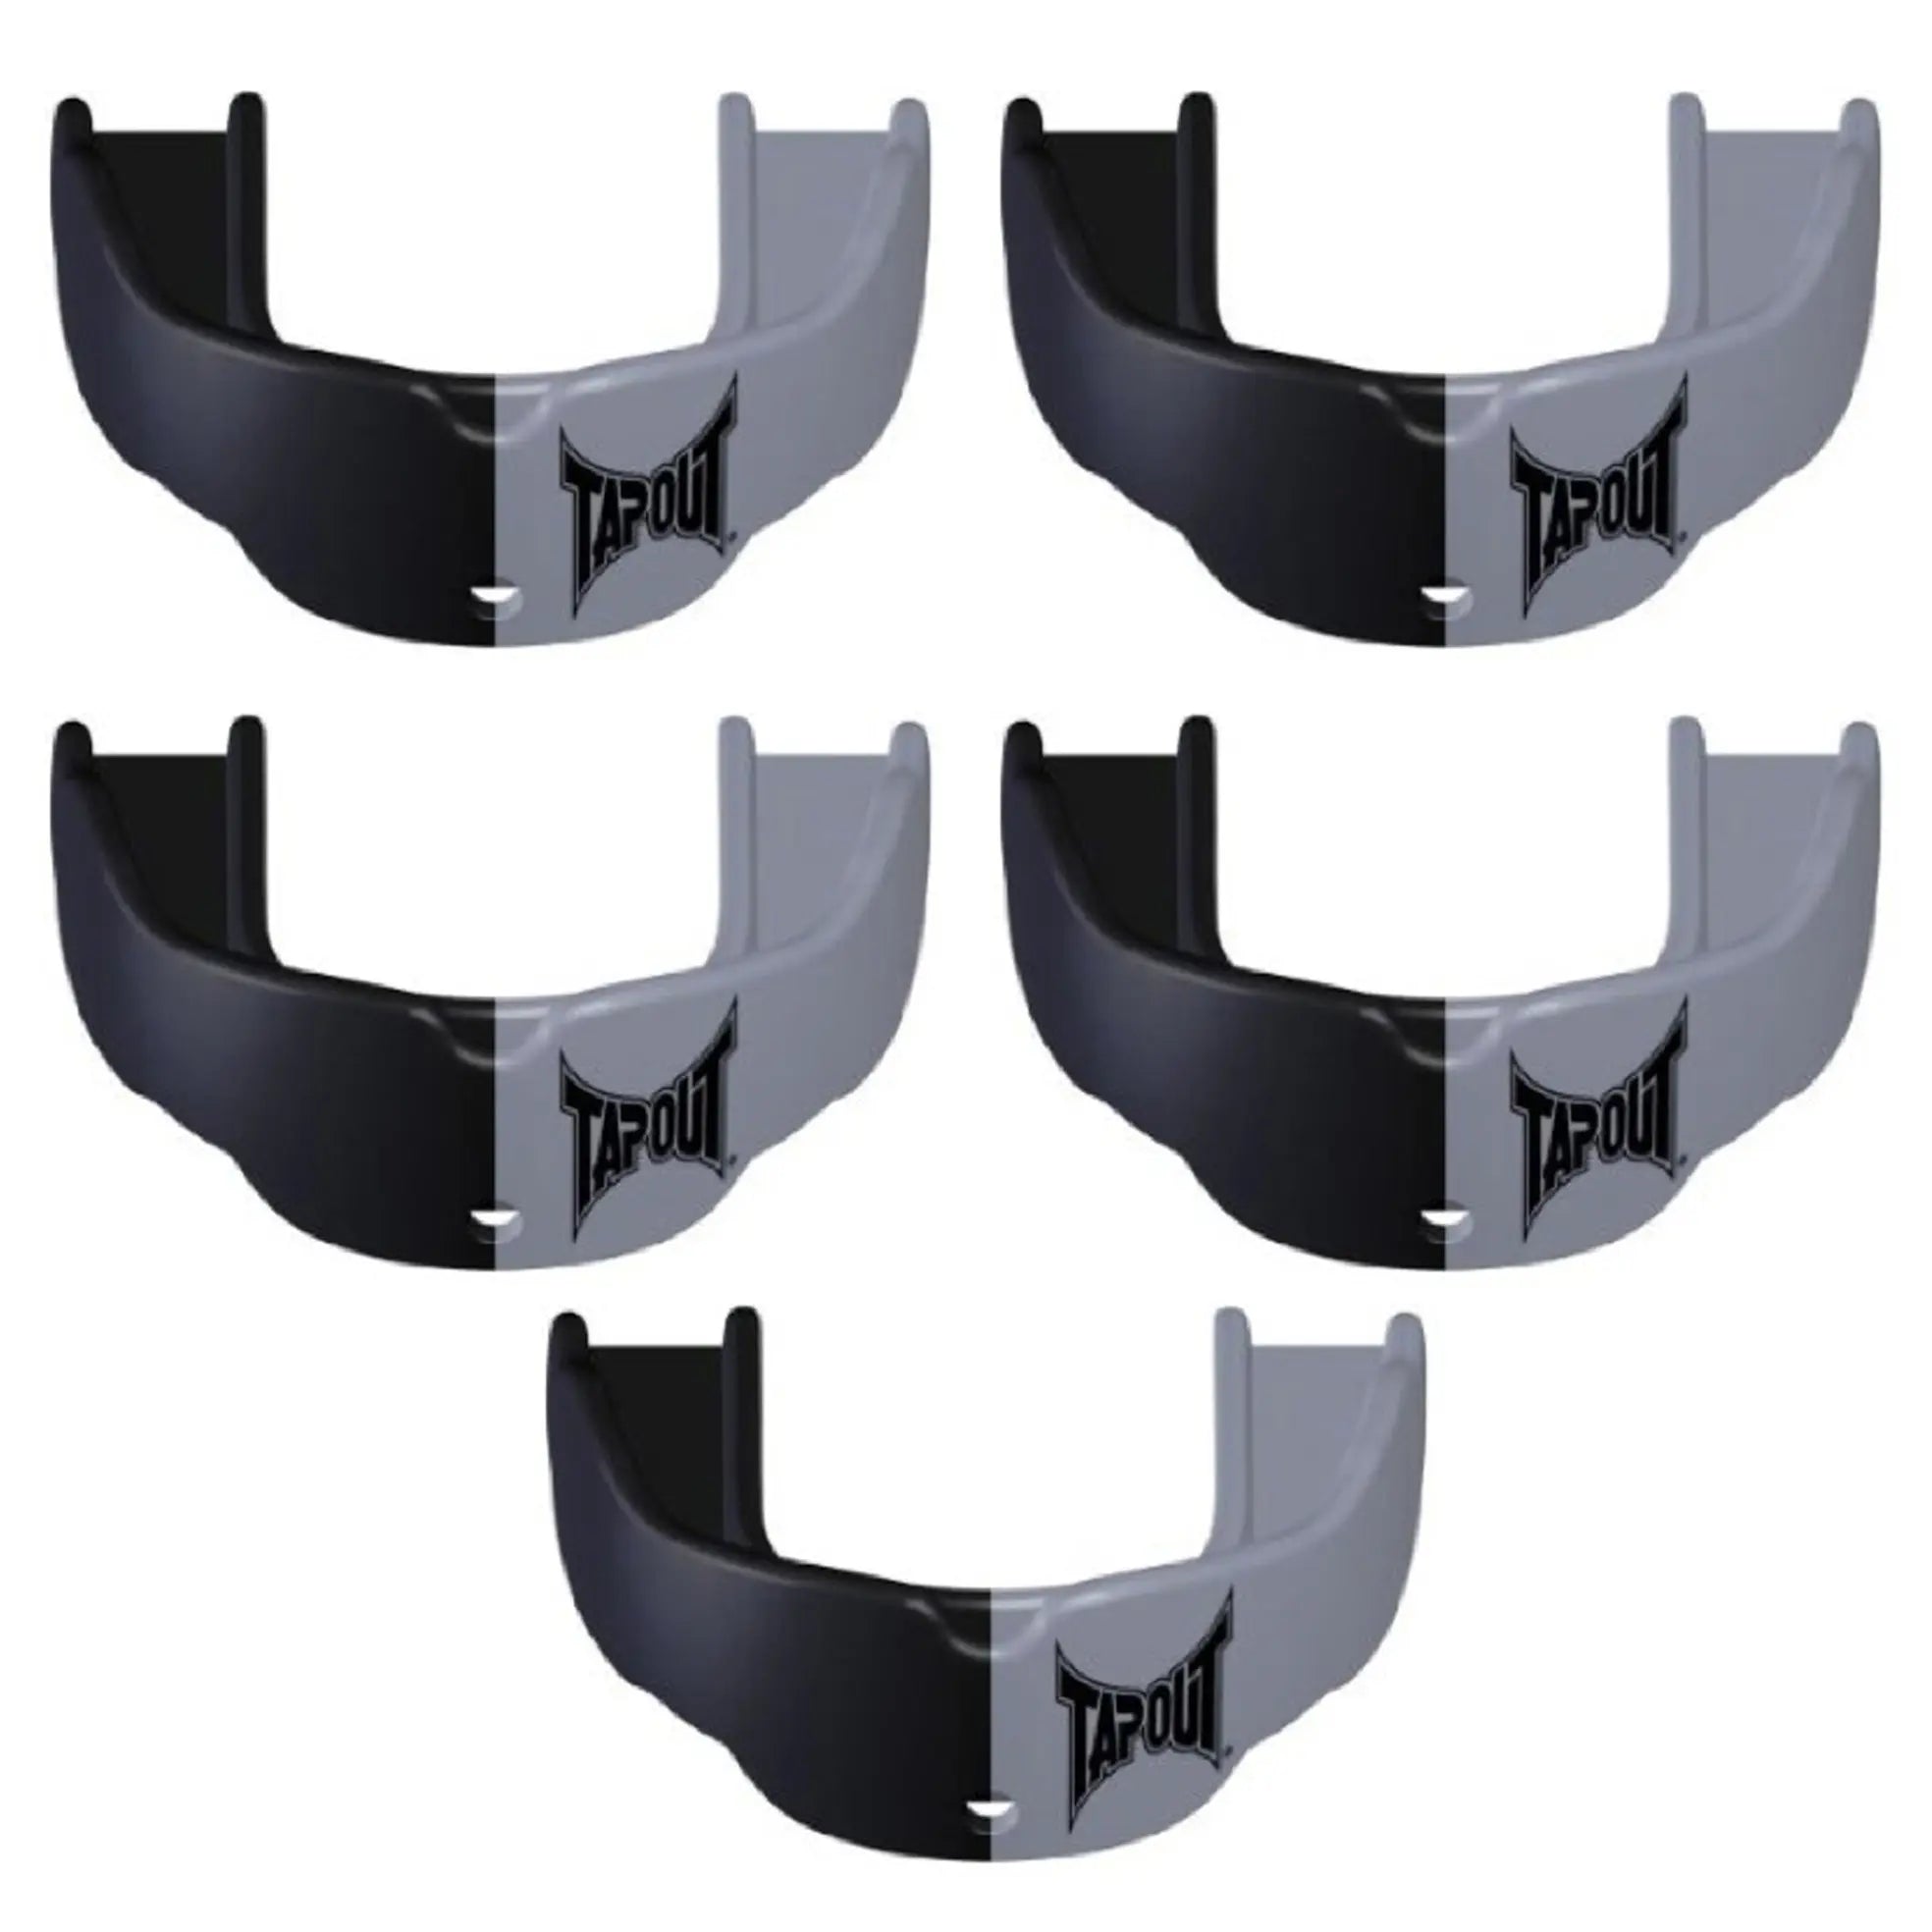 Tapout Adult Protective Sports Mouthguard with Strap 5-Pack - Silver/Black Tapout